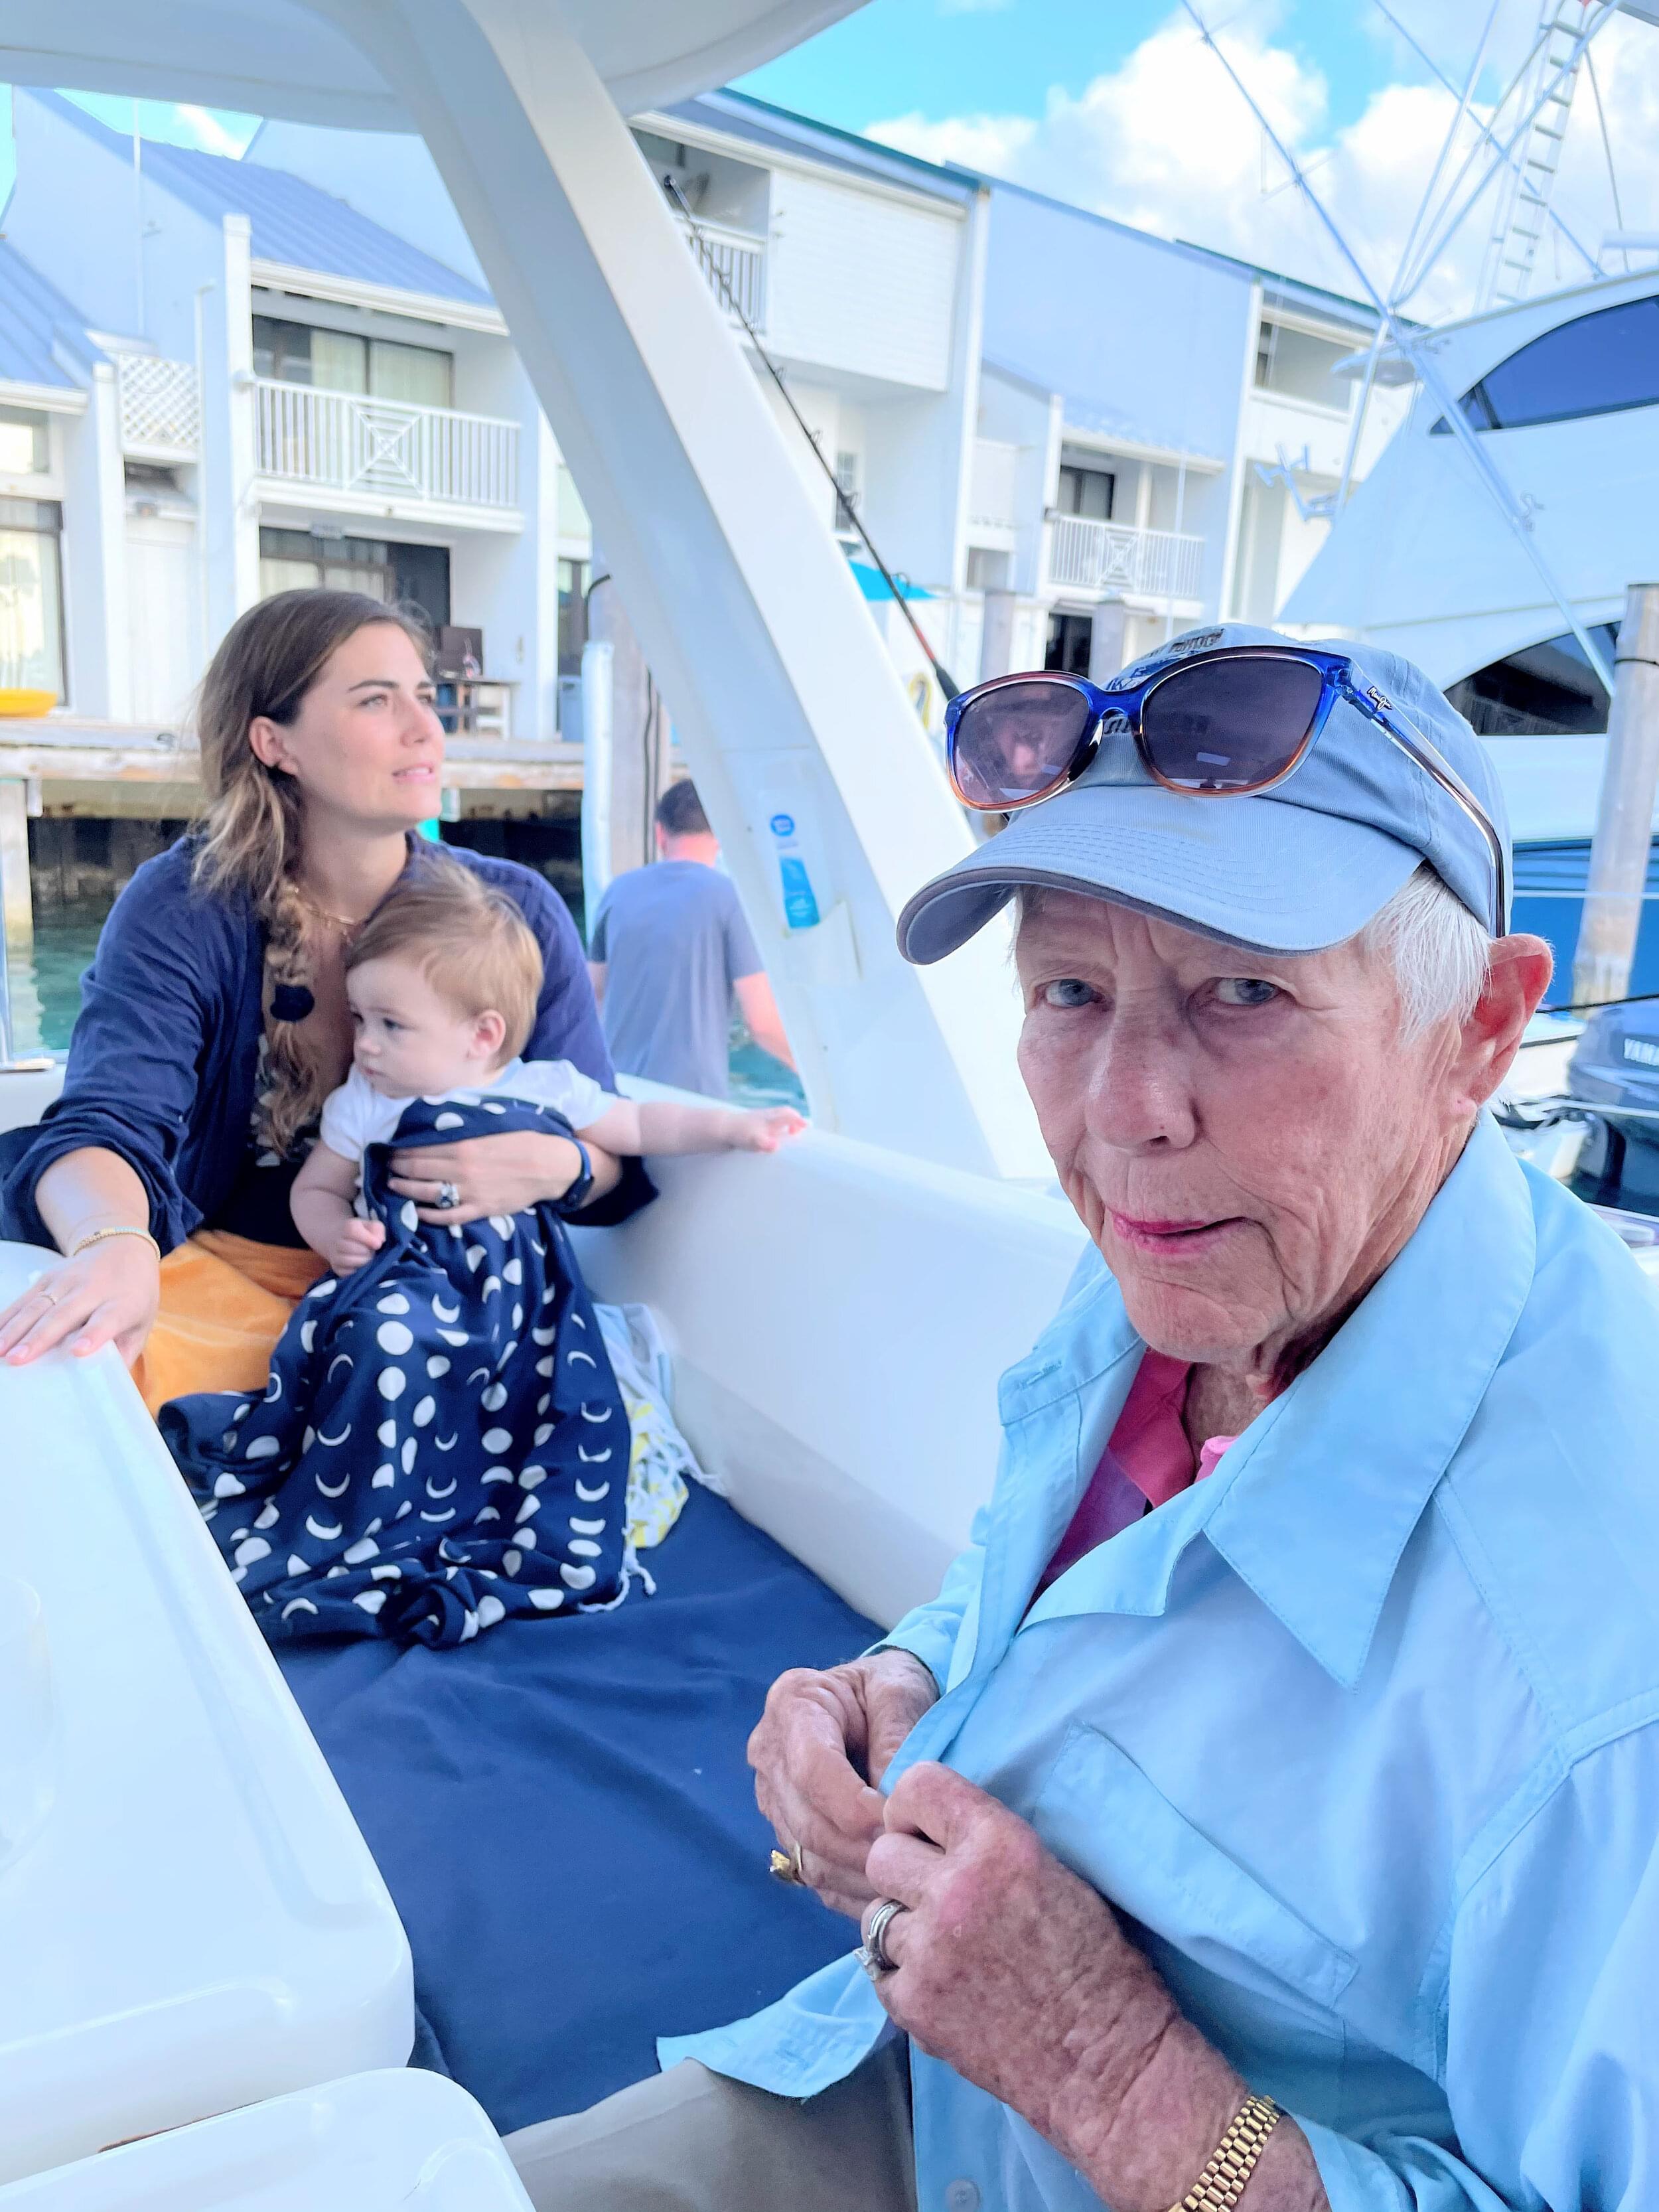 Sally and her family, representing 4 generation, sailed on the Maxey’s boat, the Kokomo for her 91st birthday.